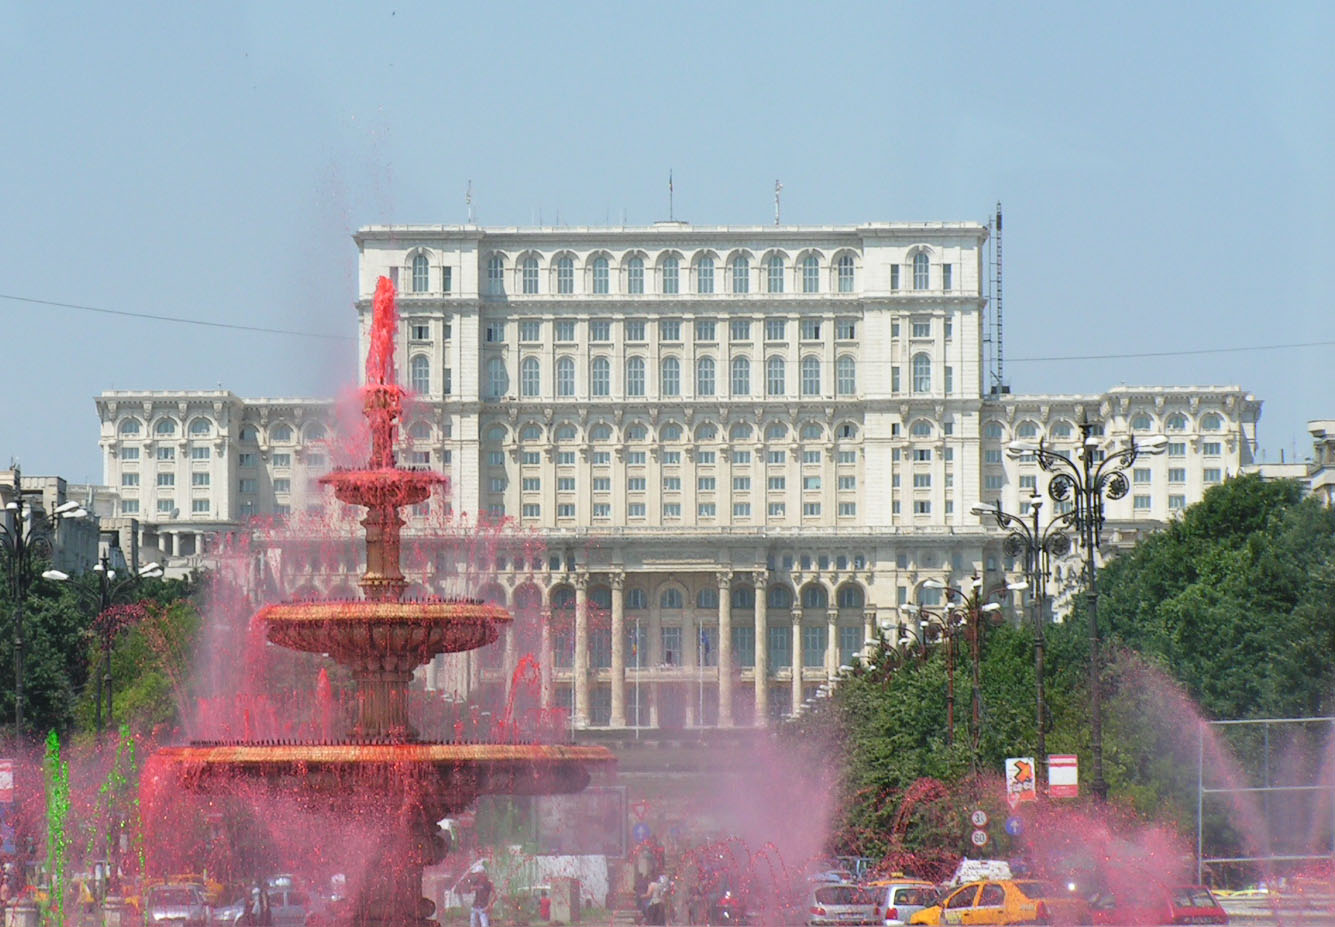 Bucharest's Ceausescu Palace and Parliament building